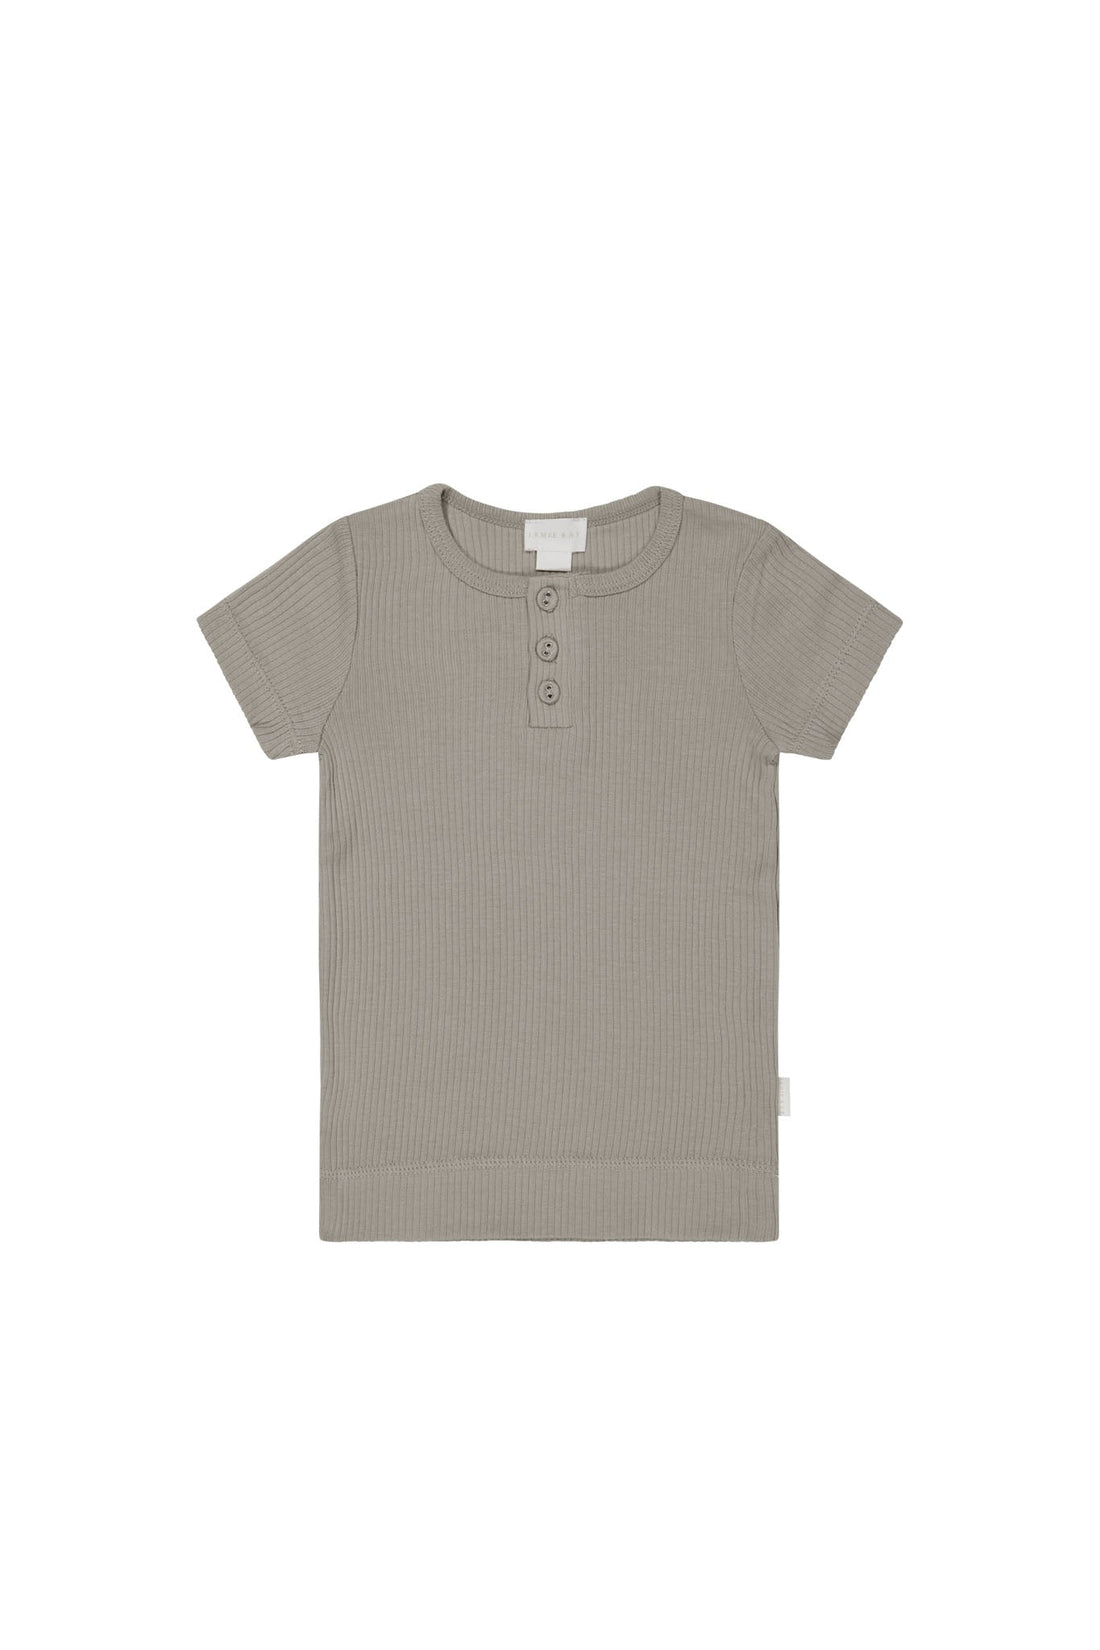 Organic Cotton Modal Henley Tee - Milford Childrens Top from Jamie Kay USA